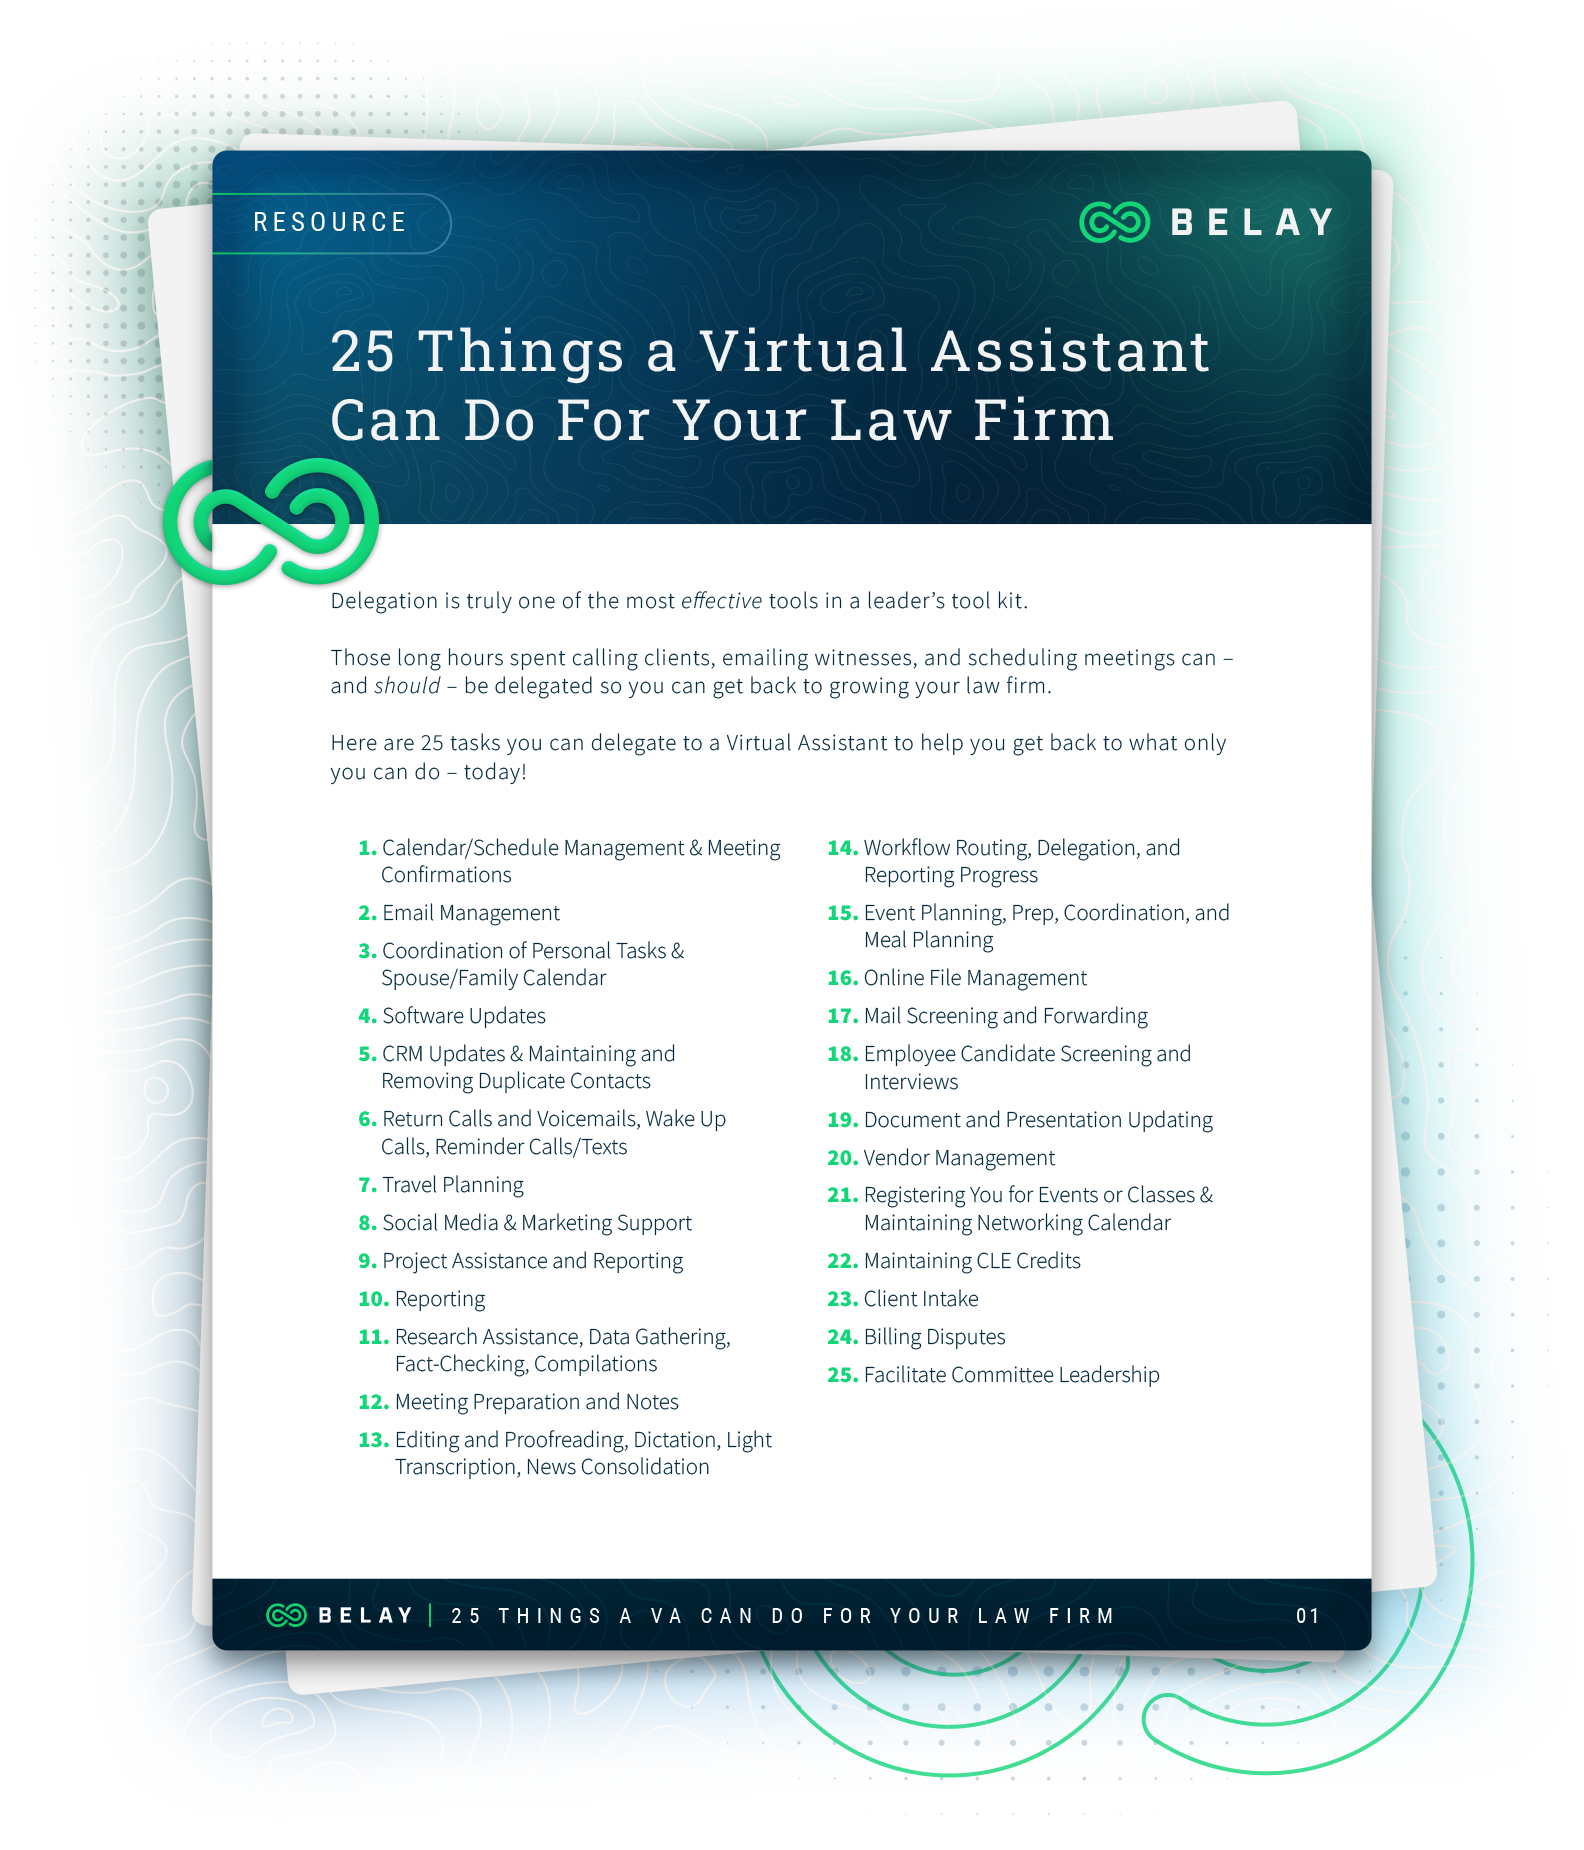 25 Things a Virtual Assistant Can Do For Your Law Firm